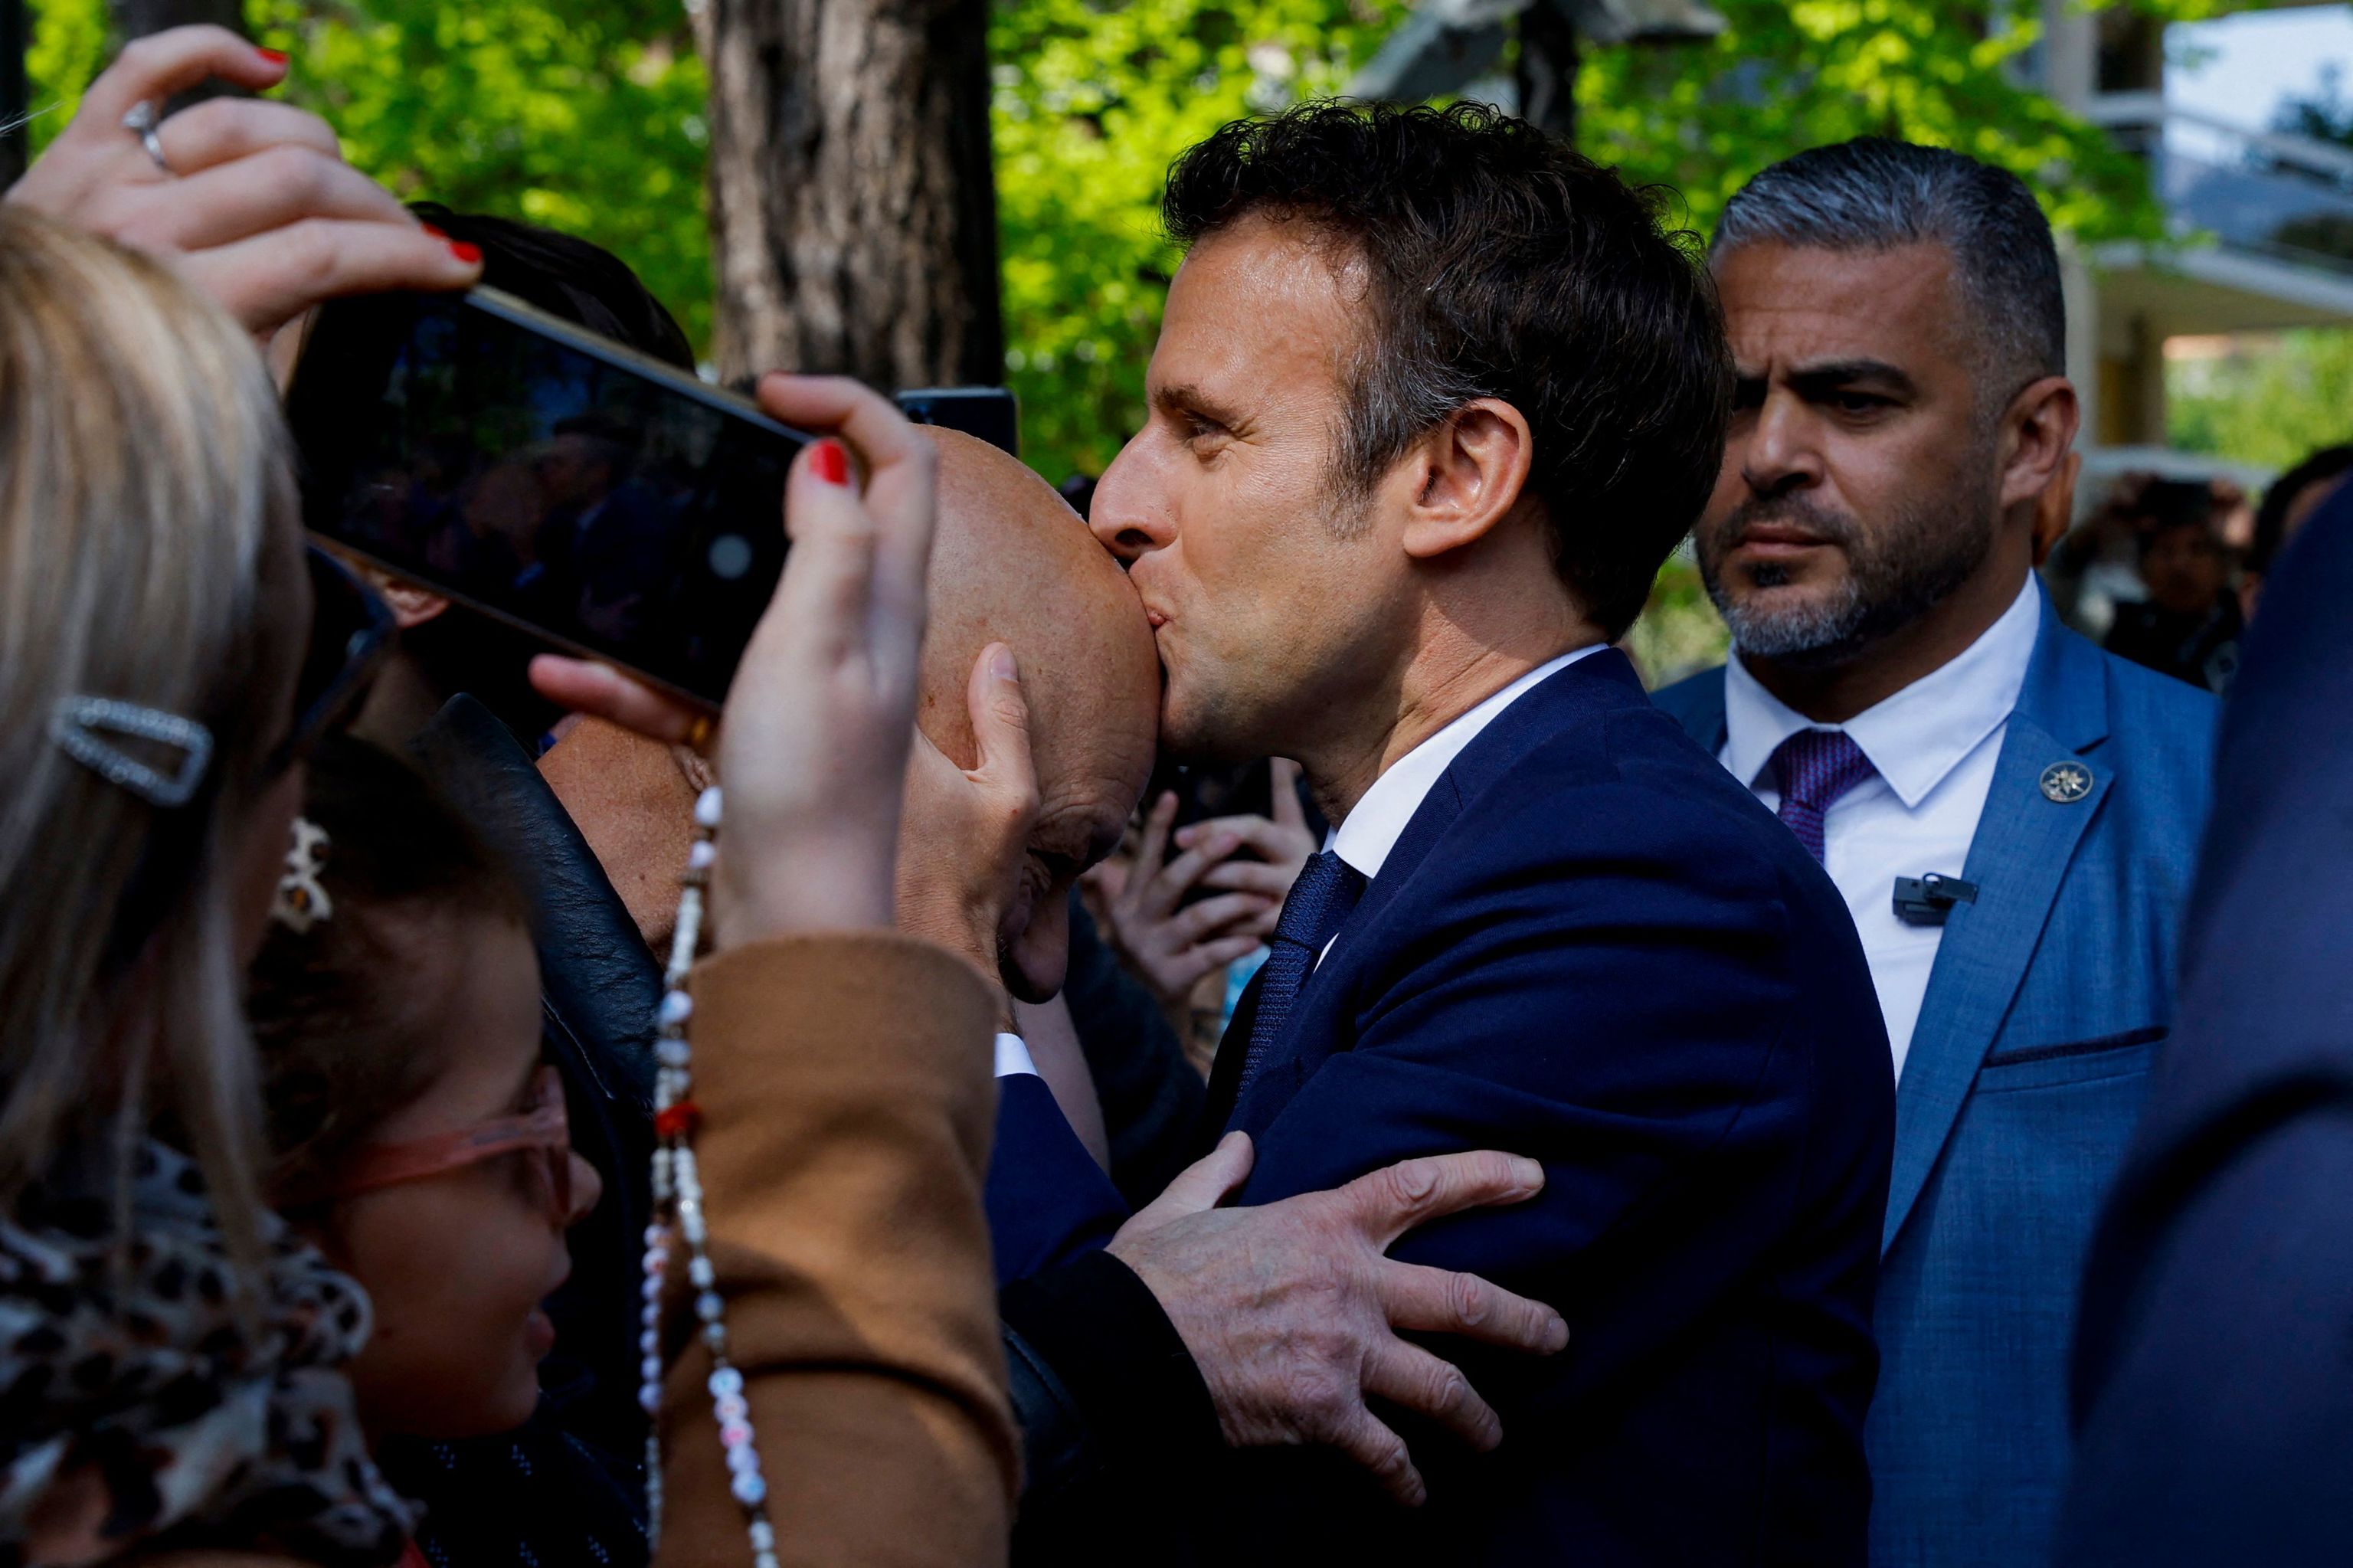 TOPSHOT - France's President and LREM party presidential candidate Emmanuel  lt;HIT gt;Macron lt;/HIT gt; kisses a supporter as he arrives to vote for the second round of France's presidential election at a polling station in Le Touquet, northern France, on April 24, 2022. (Photo by GONZALO FUENTES / POOL / AFP)